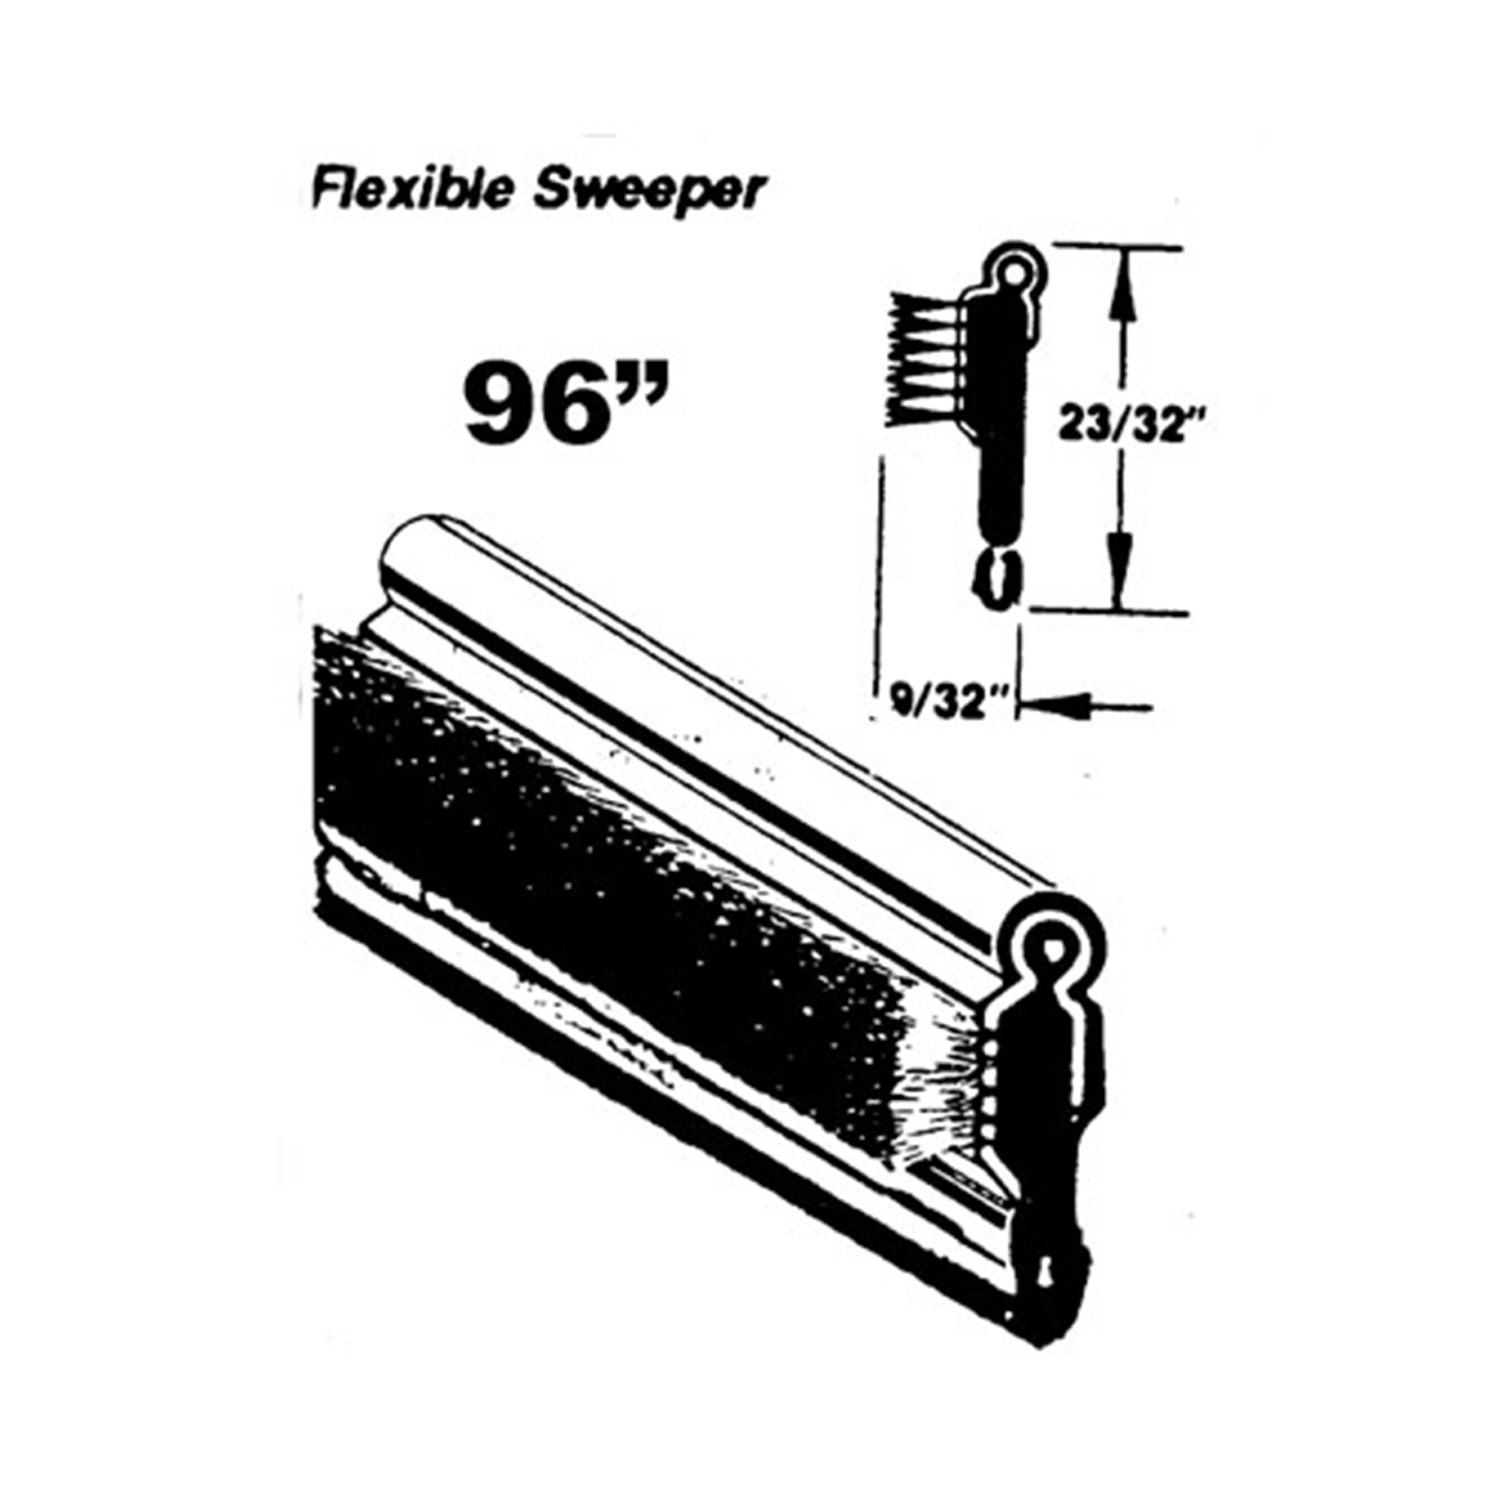 1956 Chrysler 300 Flexible window sweeper. Made with stainless steel bead-WC 4-96